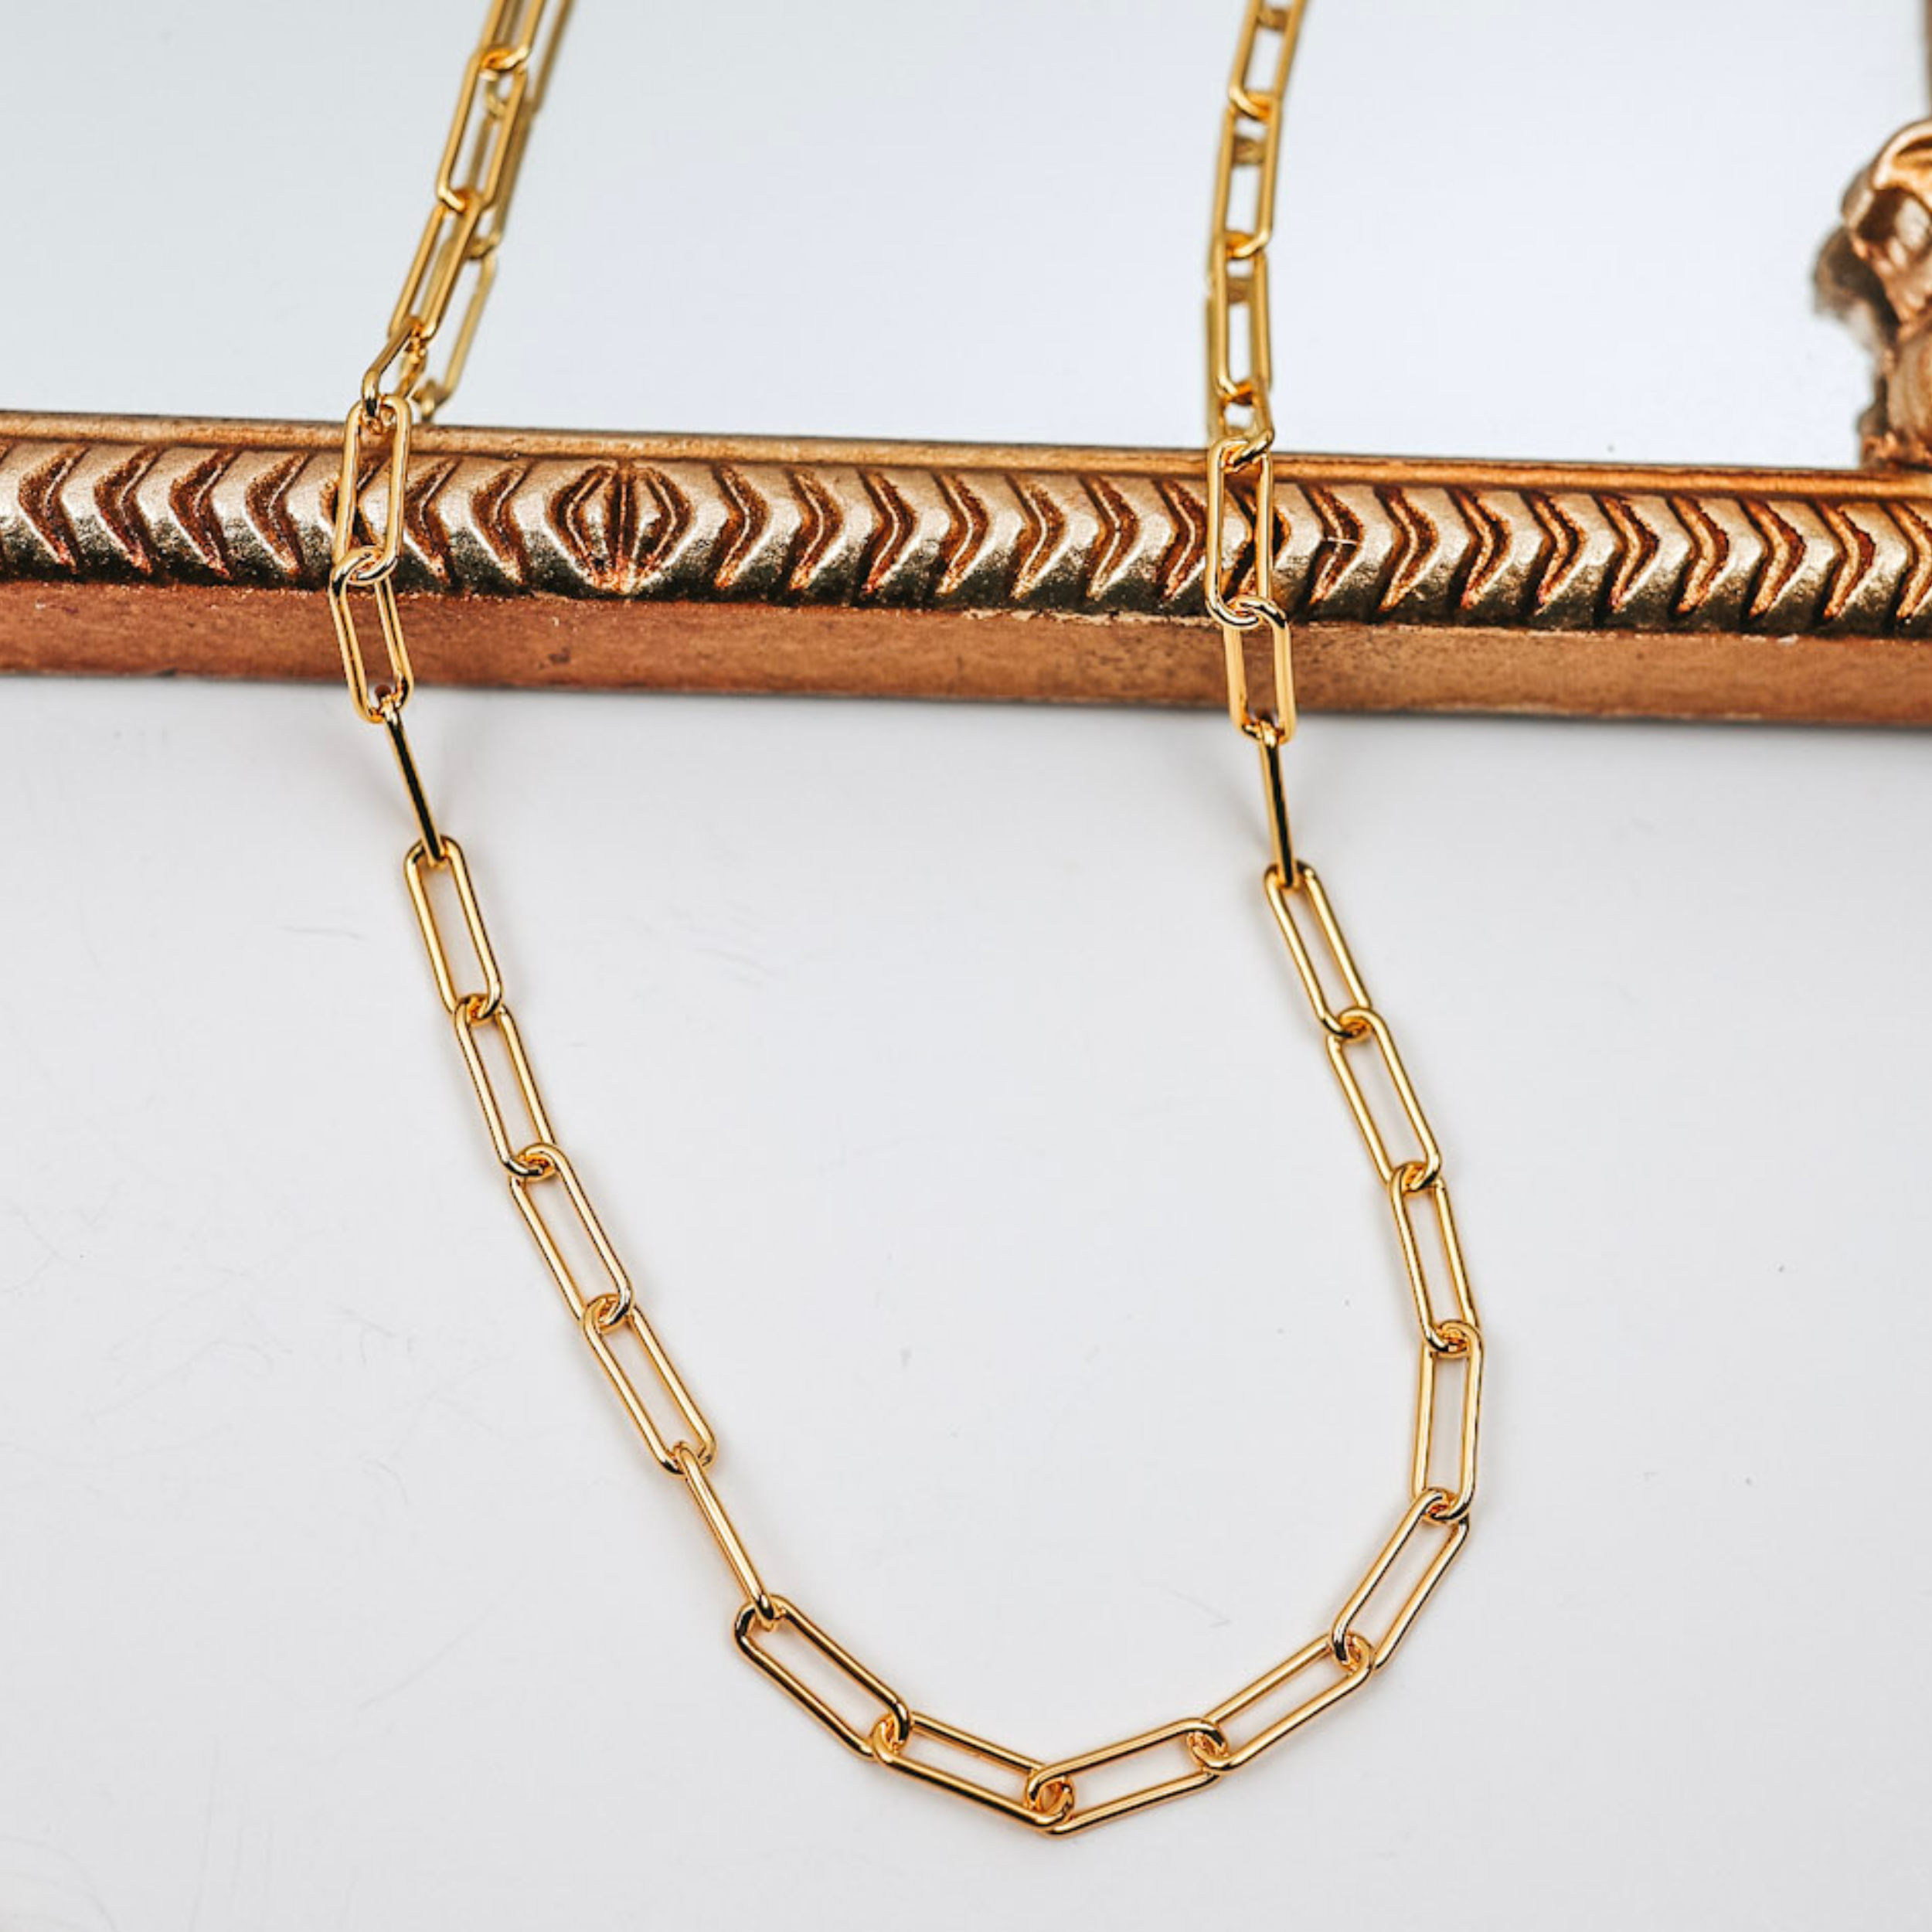 A gold-tone necklace that has paper-clip style links. This necklace is pictured on a white background with a mirror.